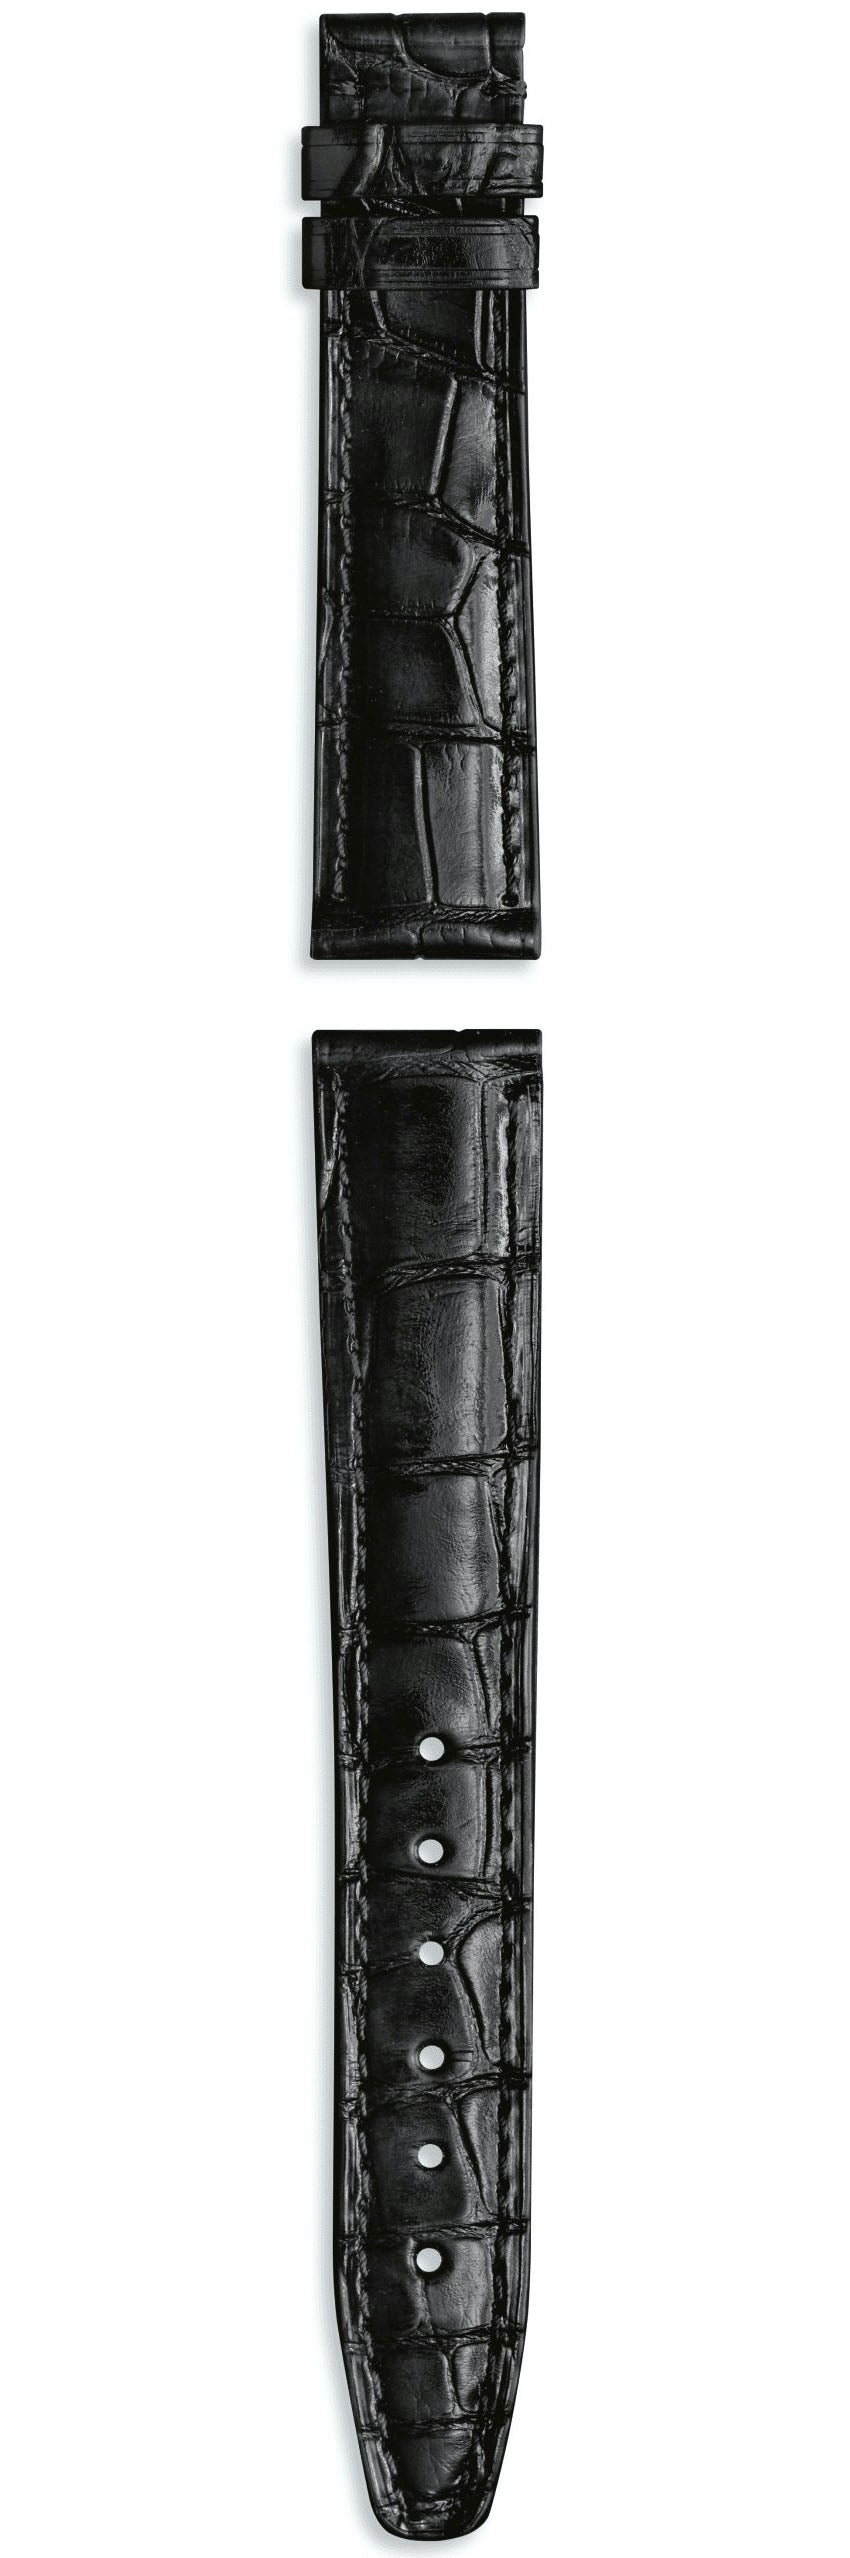 Photos - Watch Strap IWC Strap Alligator Black For Butterfly Clasp XS - Black -S-080 